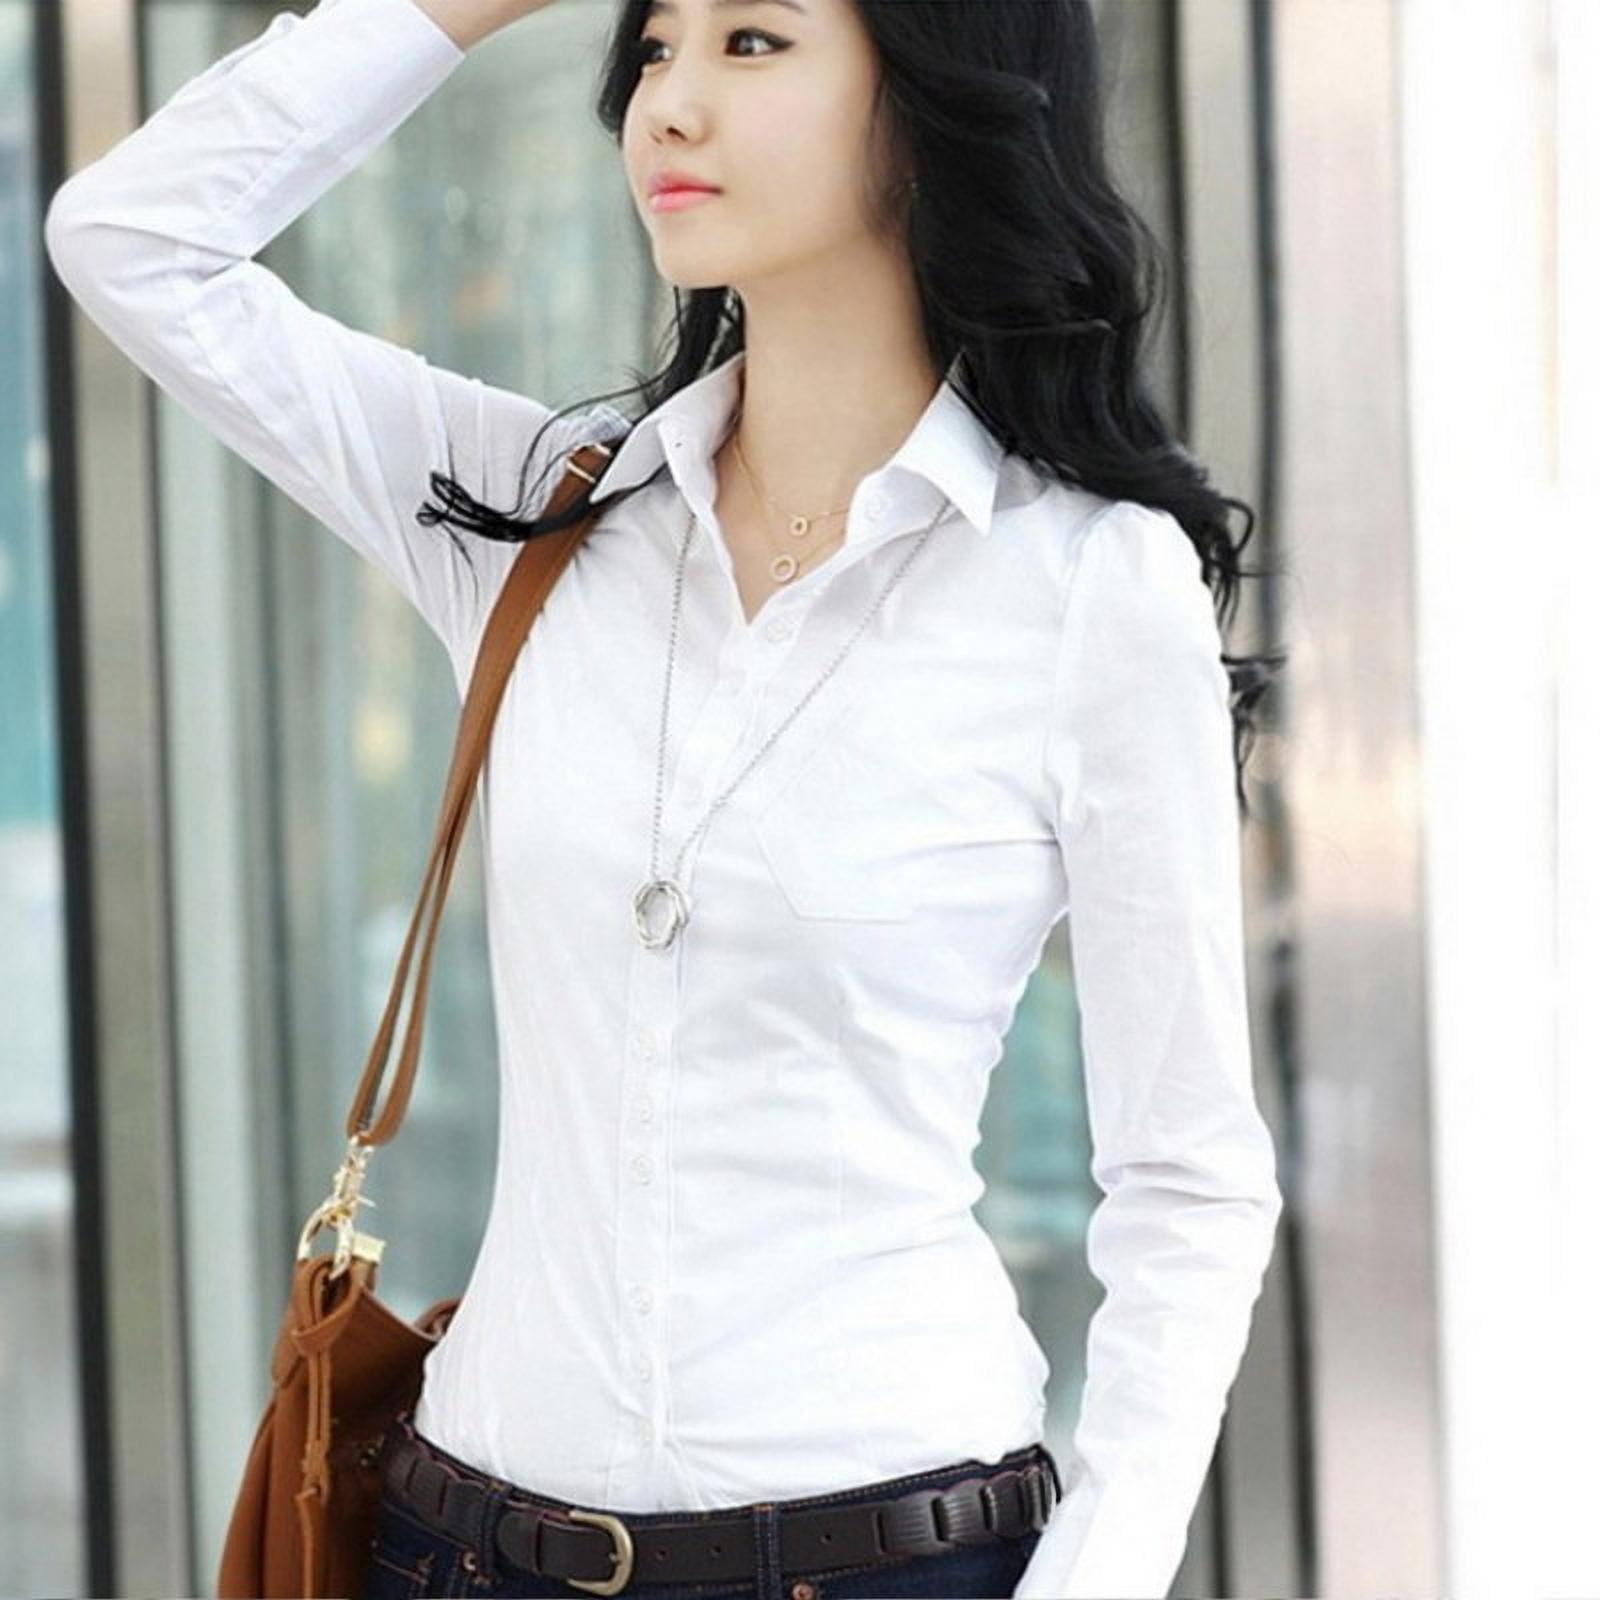 Women Body Shirts and Blouses Long Sleeved Fashion Bodysuits White Color  Autumn Winter Tops Office Lady Work Formal Shirt Female - AliExpress